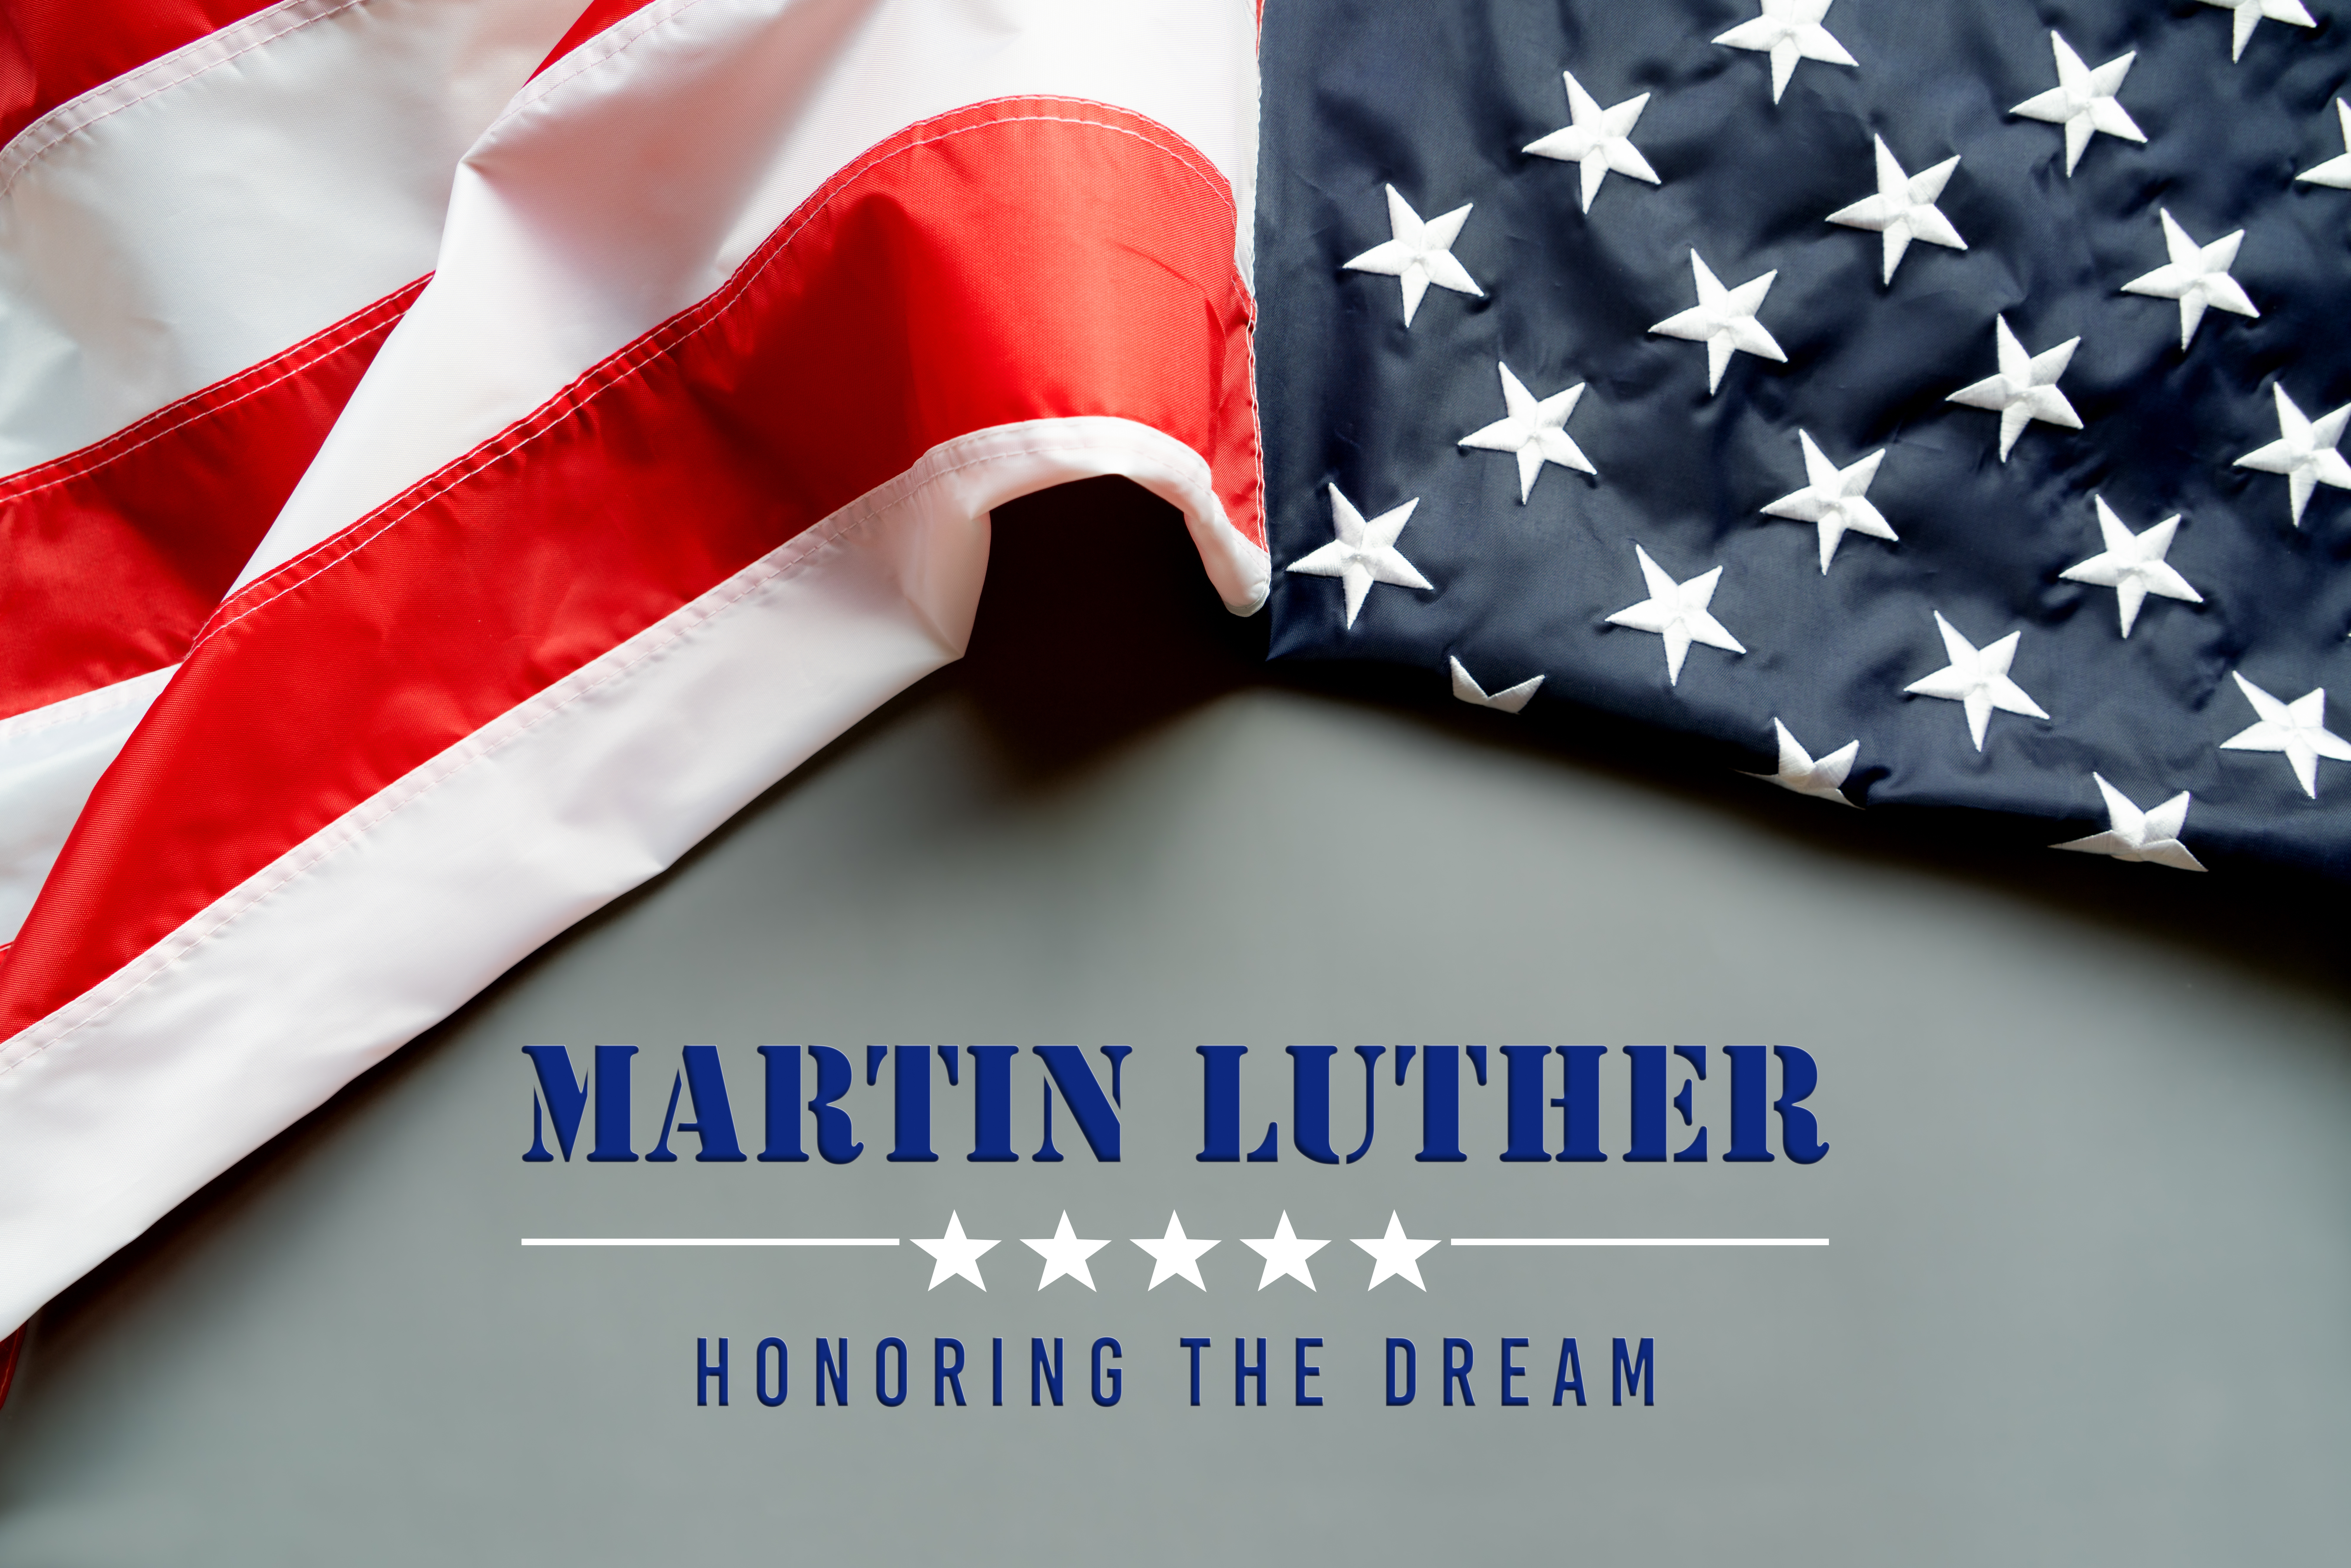 Honor Martin Luther King, Jr. day, January 16th